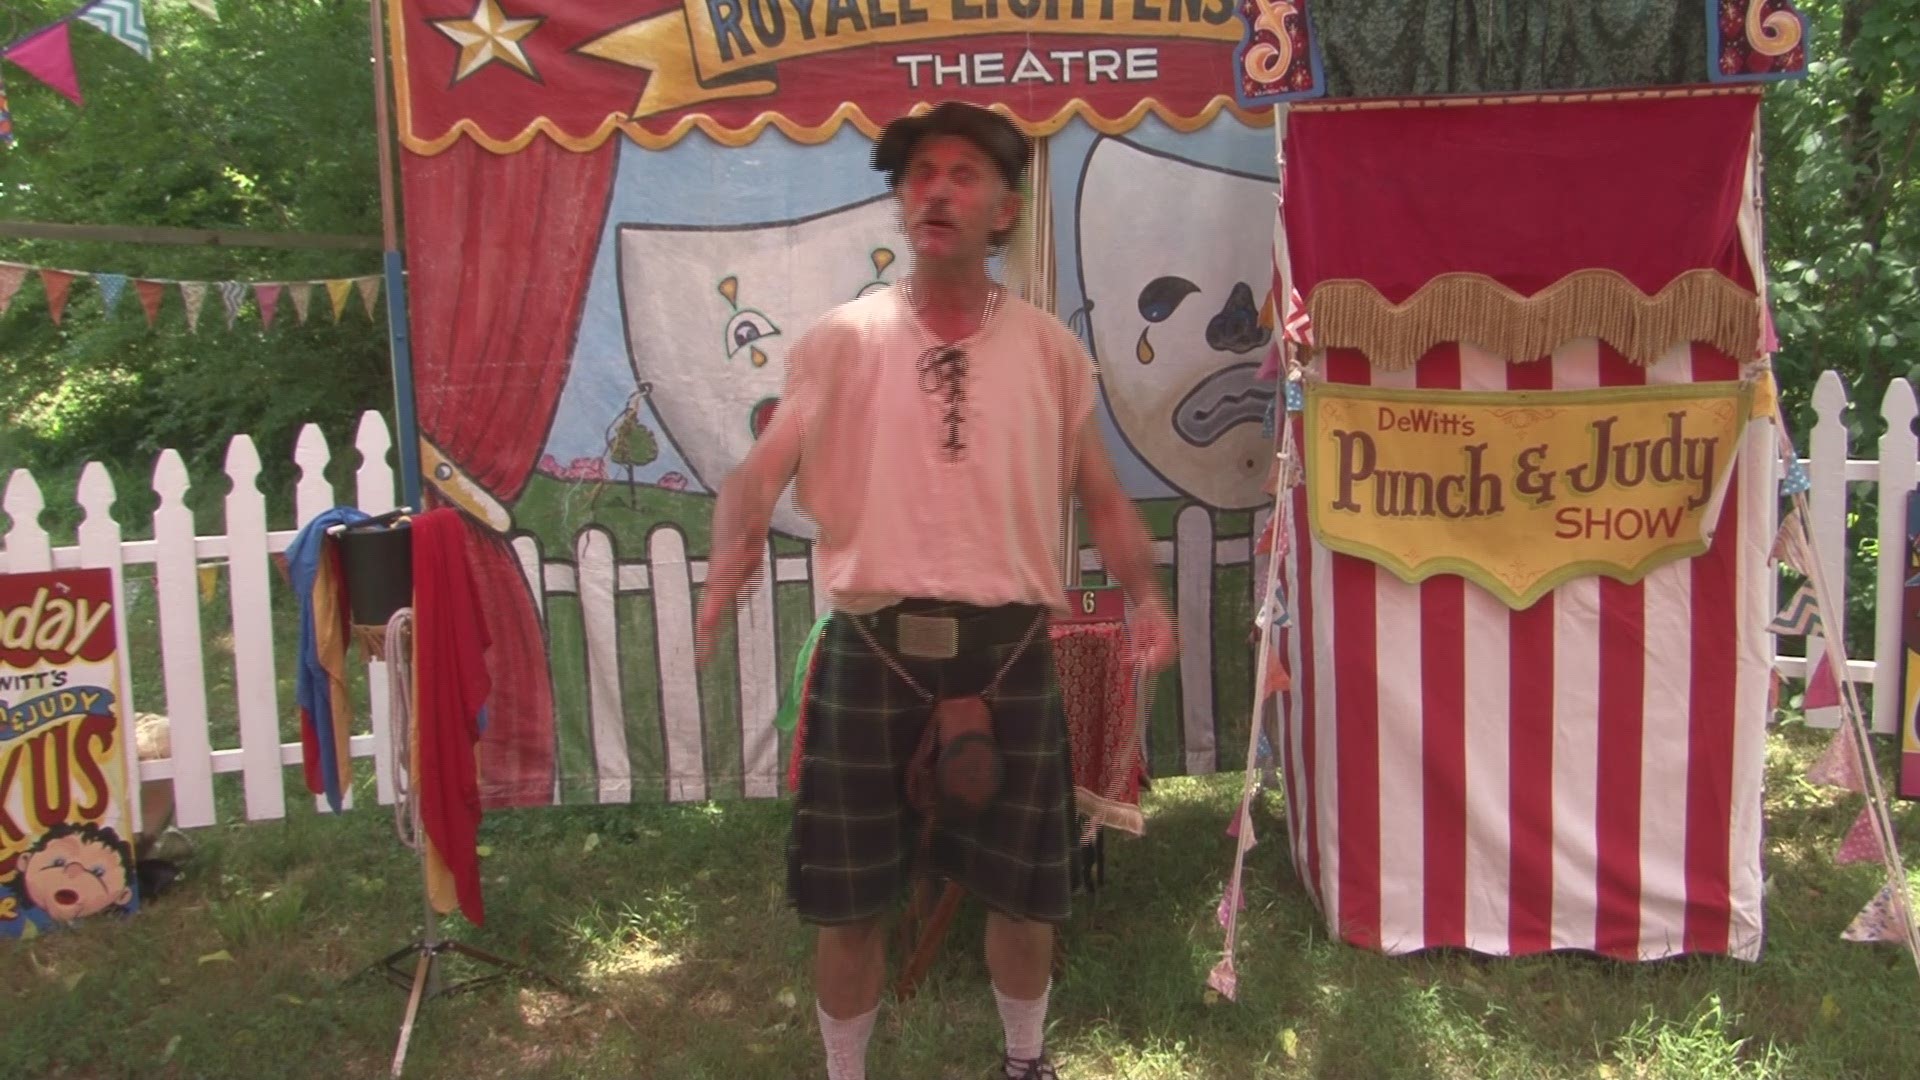 The Tennessee Medieval Faire is in Harriman and it offers plenty of things to watch and do, including magic shows!